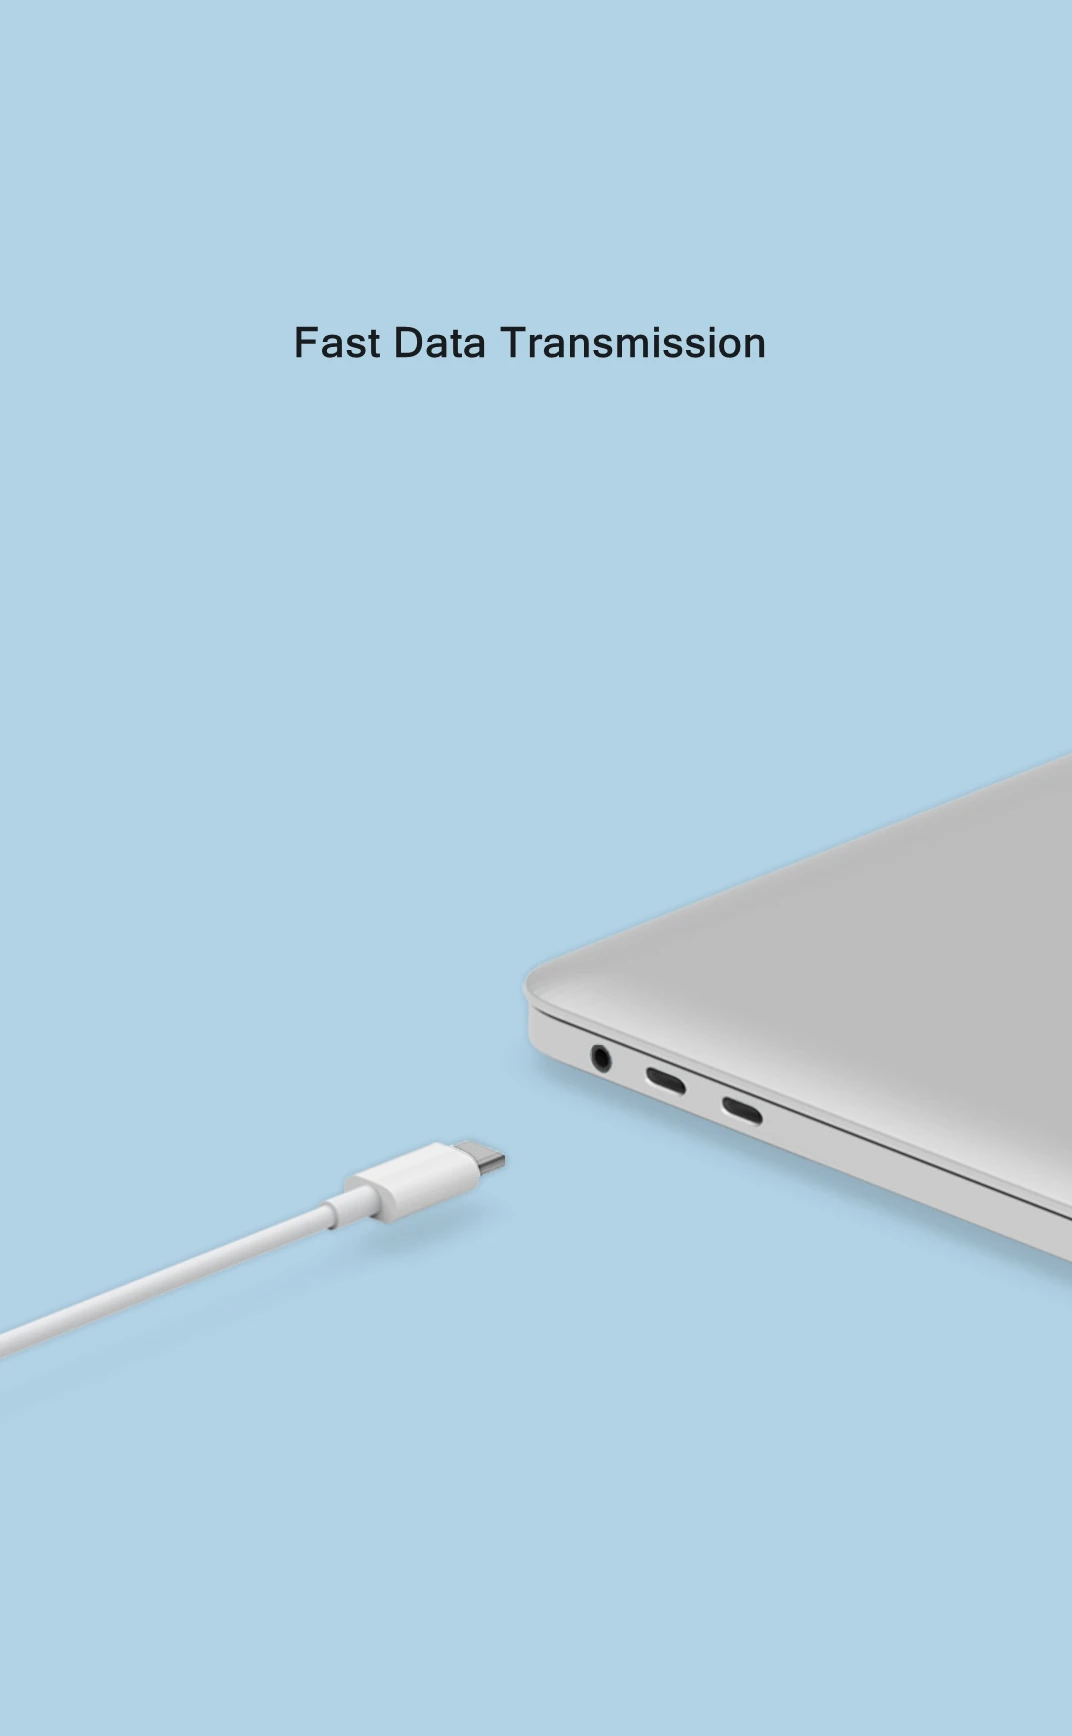 F87Ca426 4D4A 46B8 9020 A315B74A79Af.png Xiaomi Original Xiaomi Usb Cable, Usb Type-C And Apple Lightning Connectors. Mfi Certification. Length 1 Meter. White Color Xiaomi Xiaomi Mi Usb-C To Lightning Cable 1M White